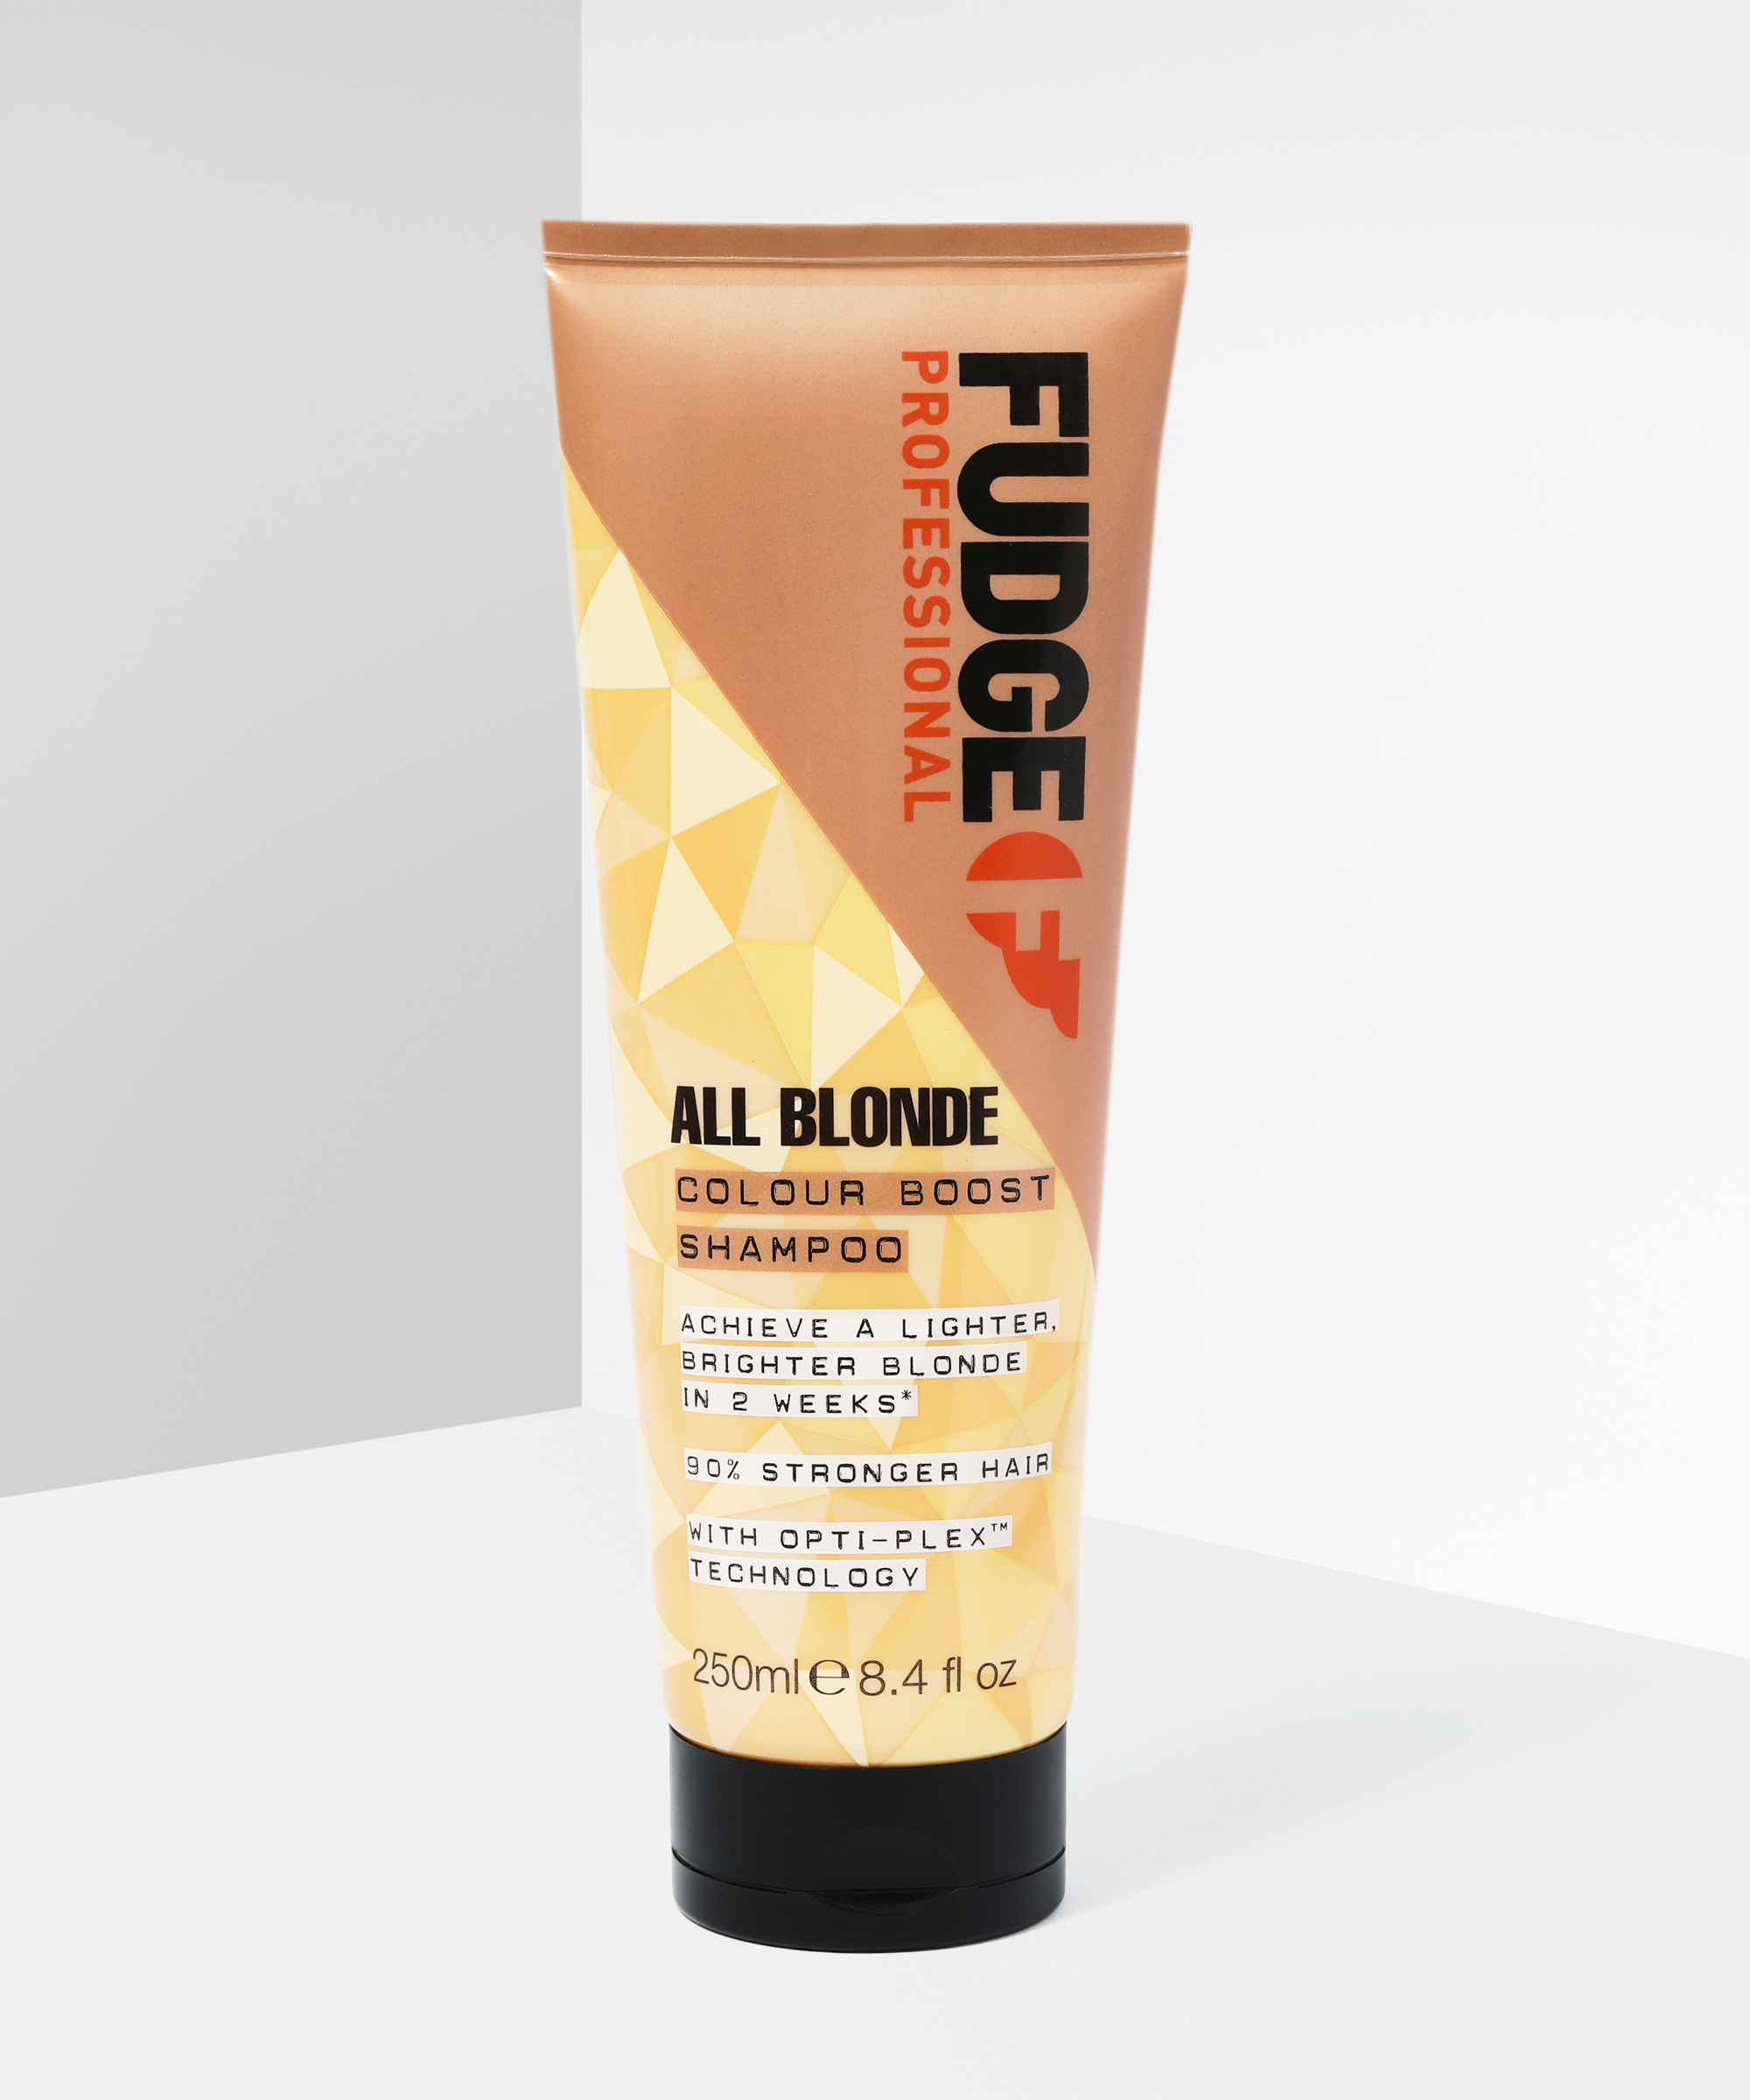 Shampoo Professional BAY Colour Booster at Blonde All BEAUTY Fudge